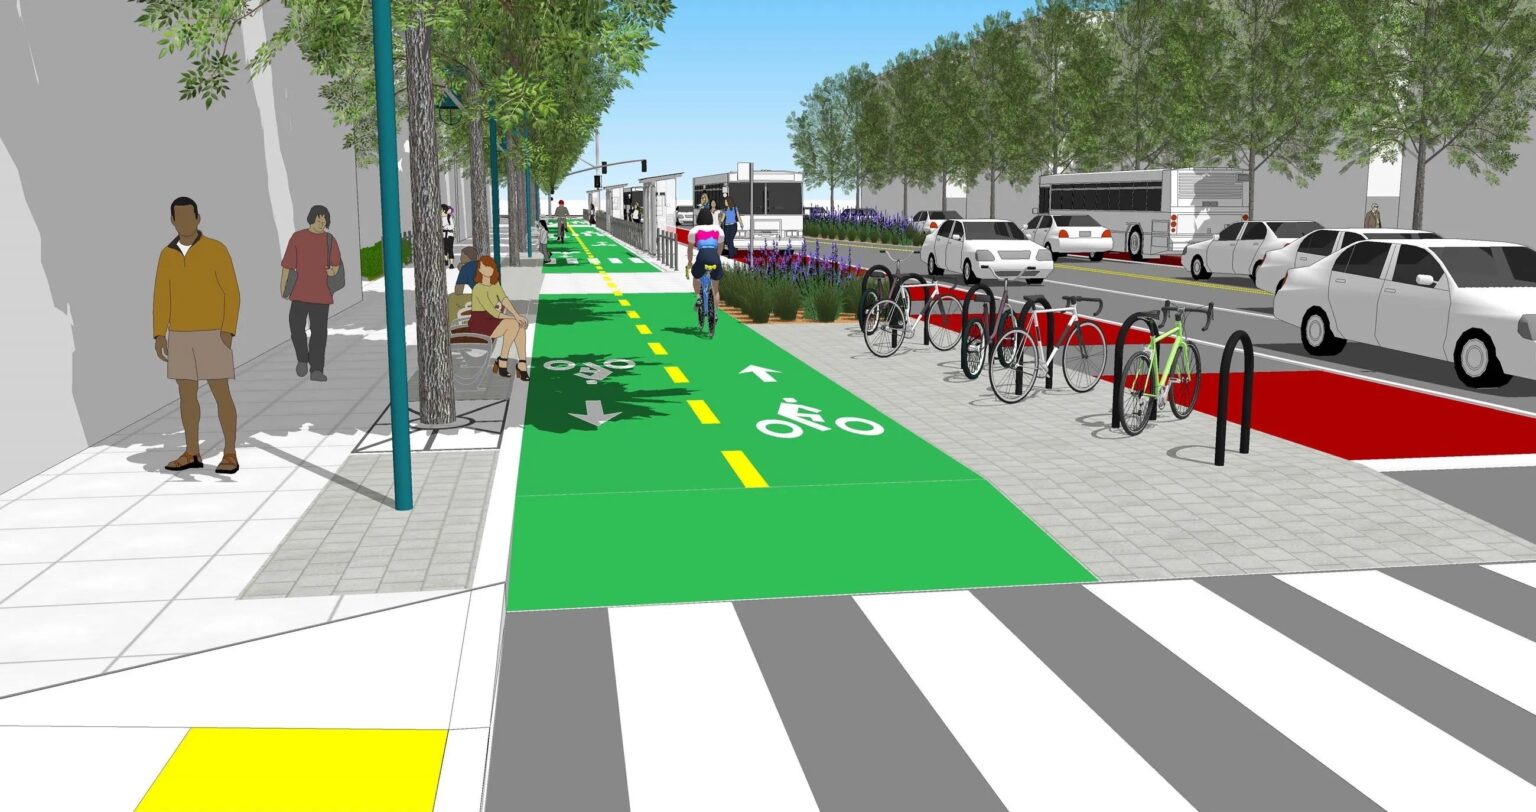 Illustration of a 2-way protected bikeway on one side of a street, red bus lanes along concrete bus boarding islands, and car travel lanes in the center along planted medians